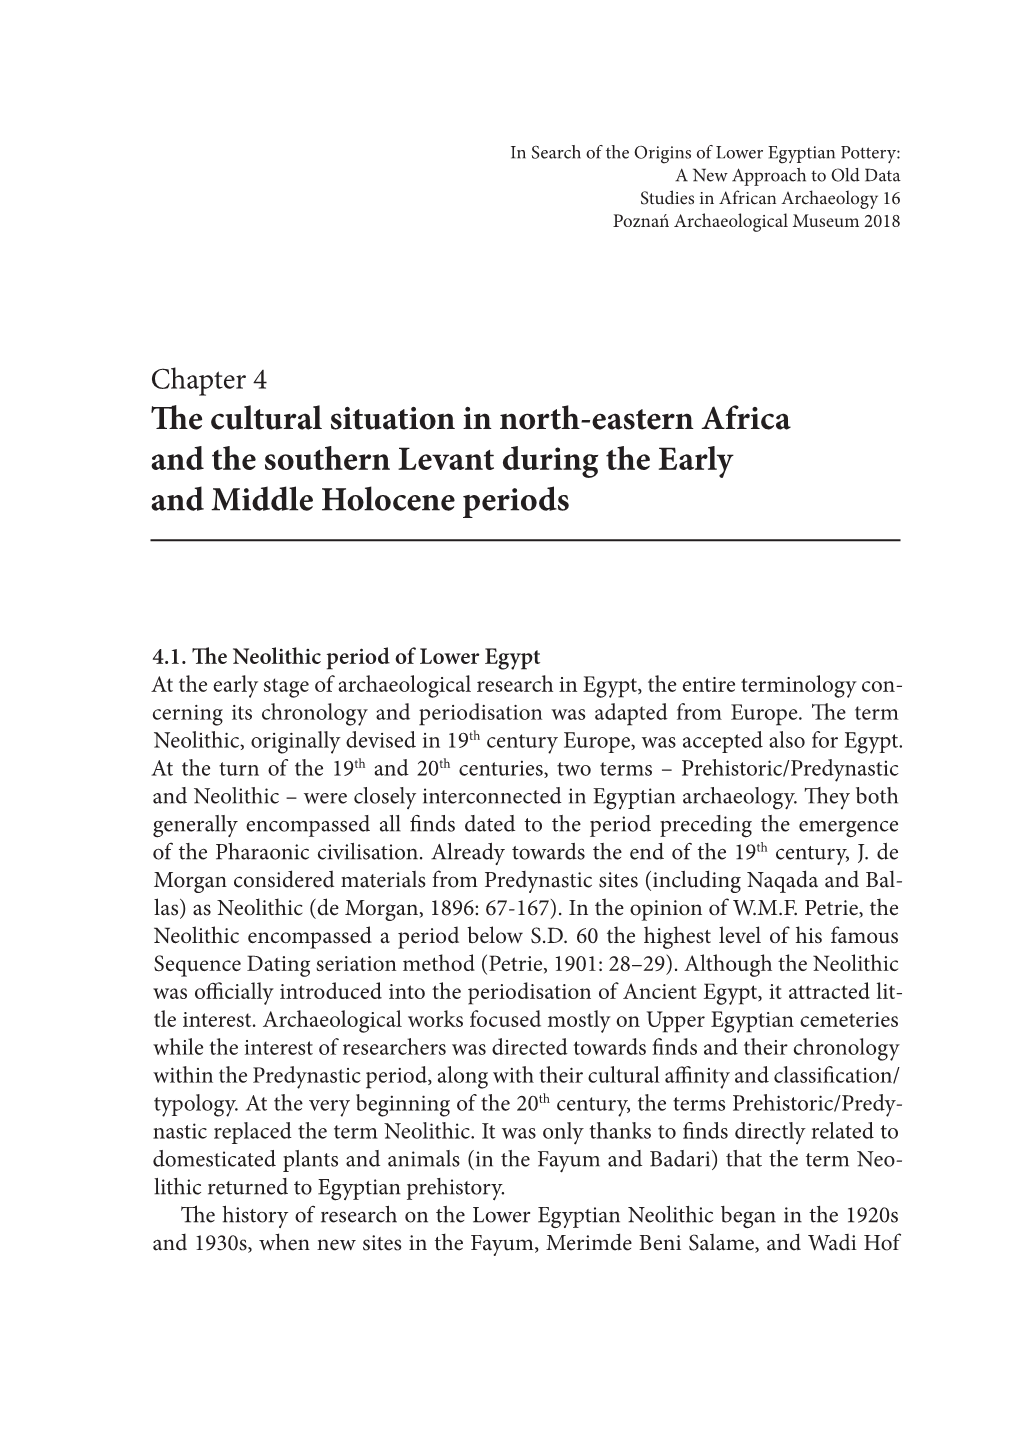 Studies in African Archaeology, Vol. 16